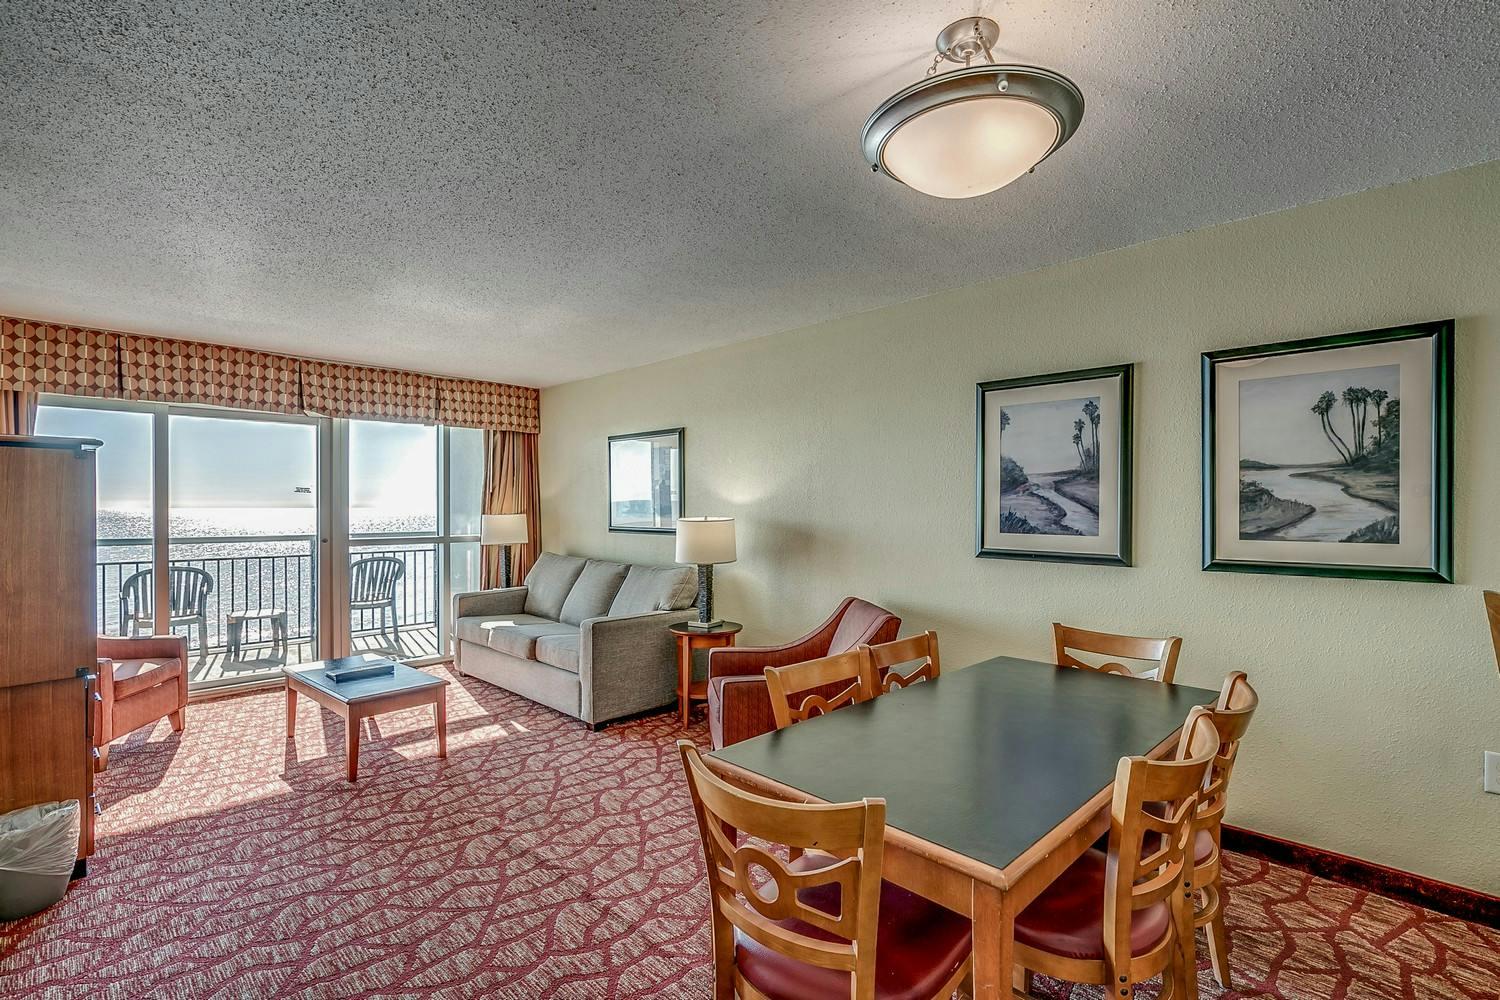 Bay View on the Boardwalk - 2 Bedroom Oceanfront Condo - E